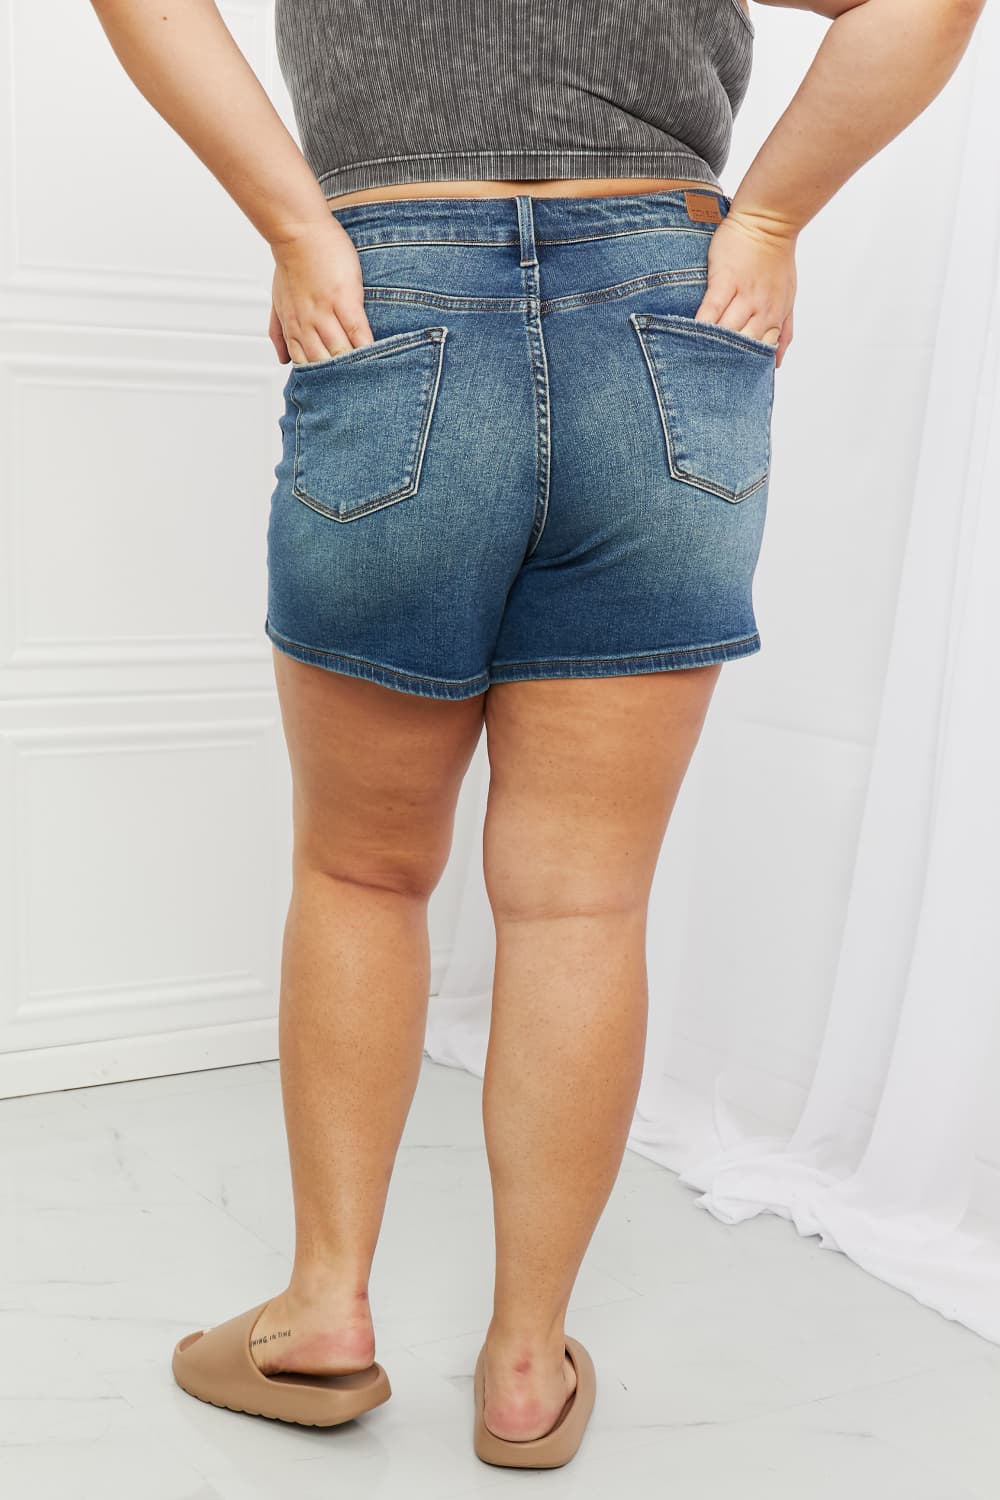 Back View, Plus Size, Judy Blue High Waist Seaming Detailed Shorts Style 150211